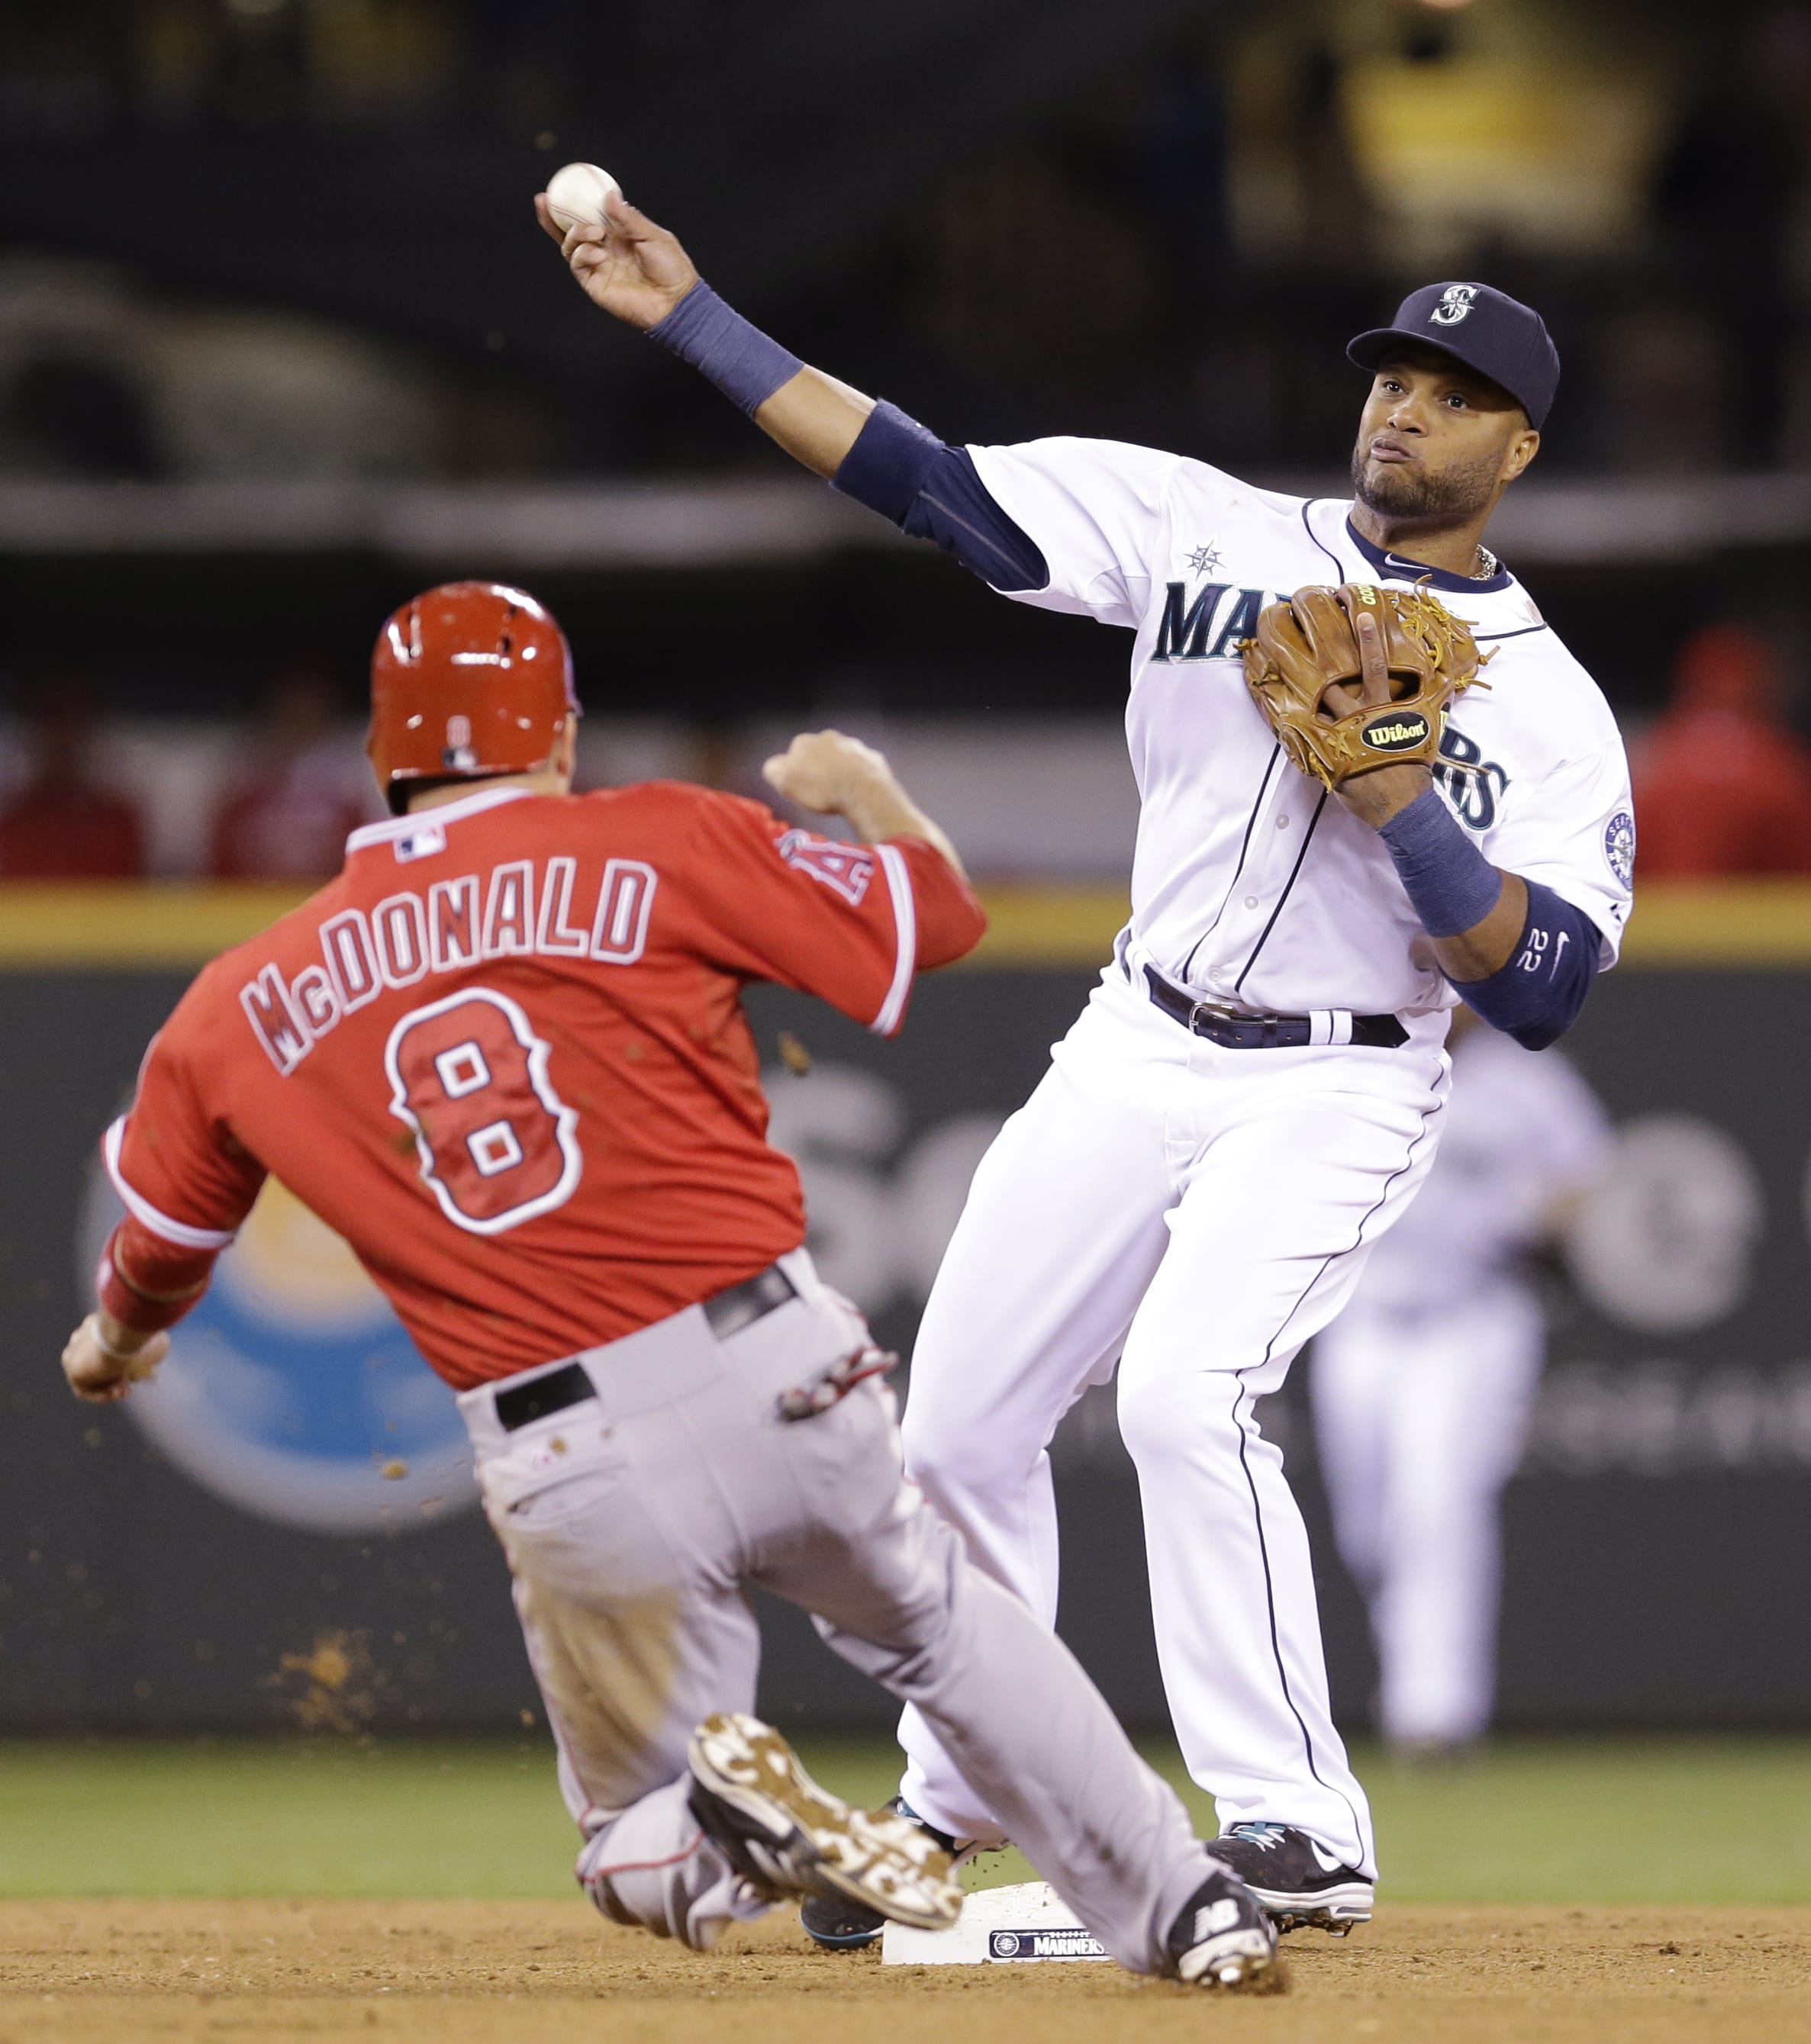 Seattle Mariners second baseman Robinson Cano, right, throws to first after forcing out Los Angeles Angels' John McDonald at second base in the fifth inning of a baseball game Wednesday, April 9, 2014, in Seattle. Mike Trout was safe at first.